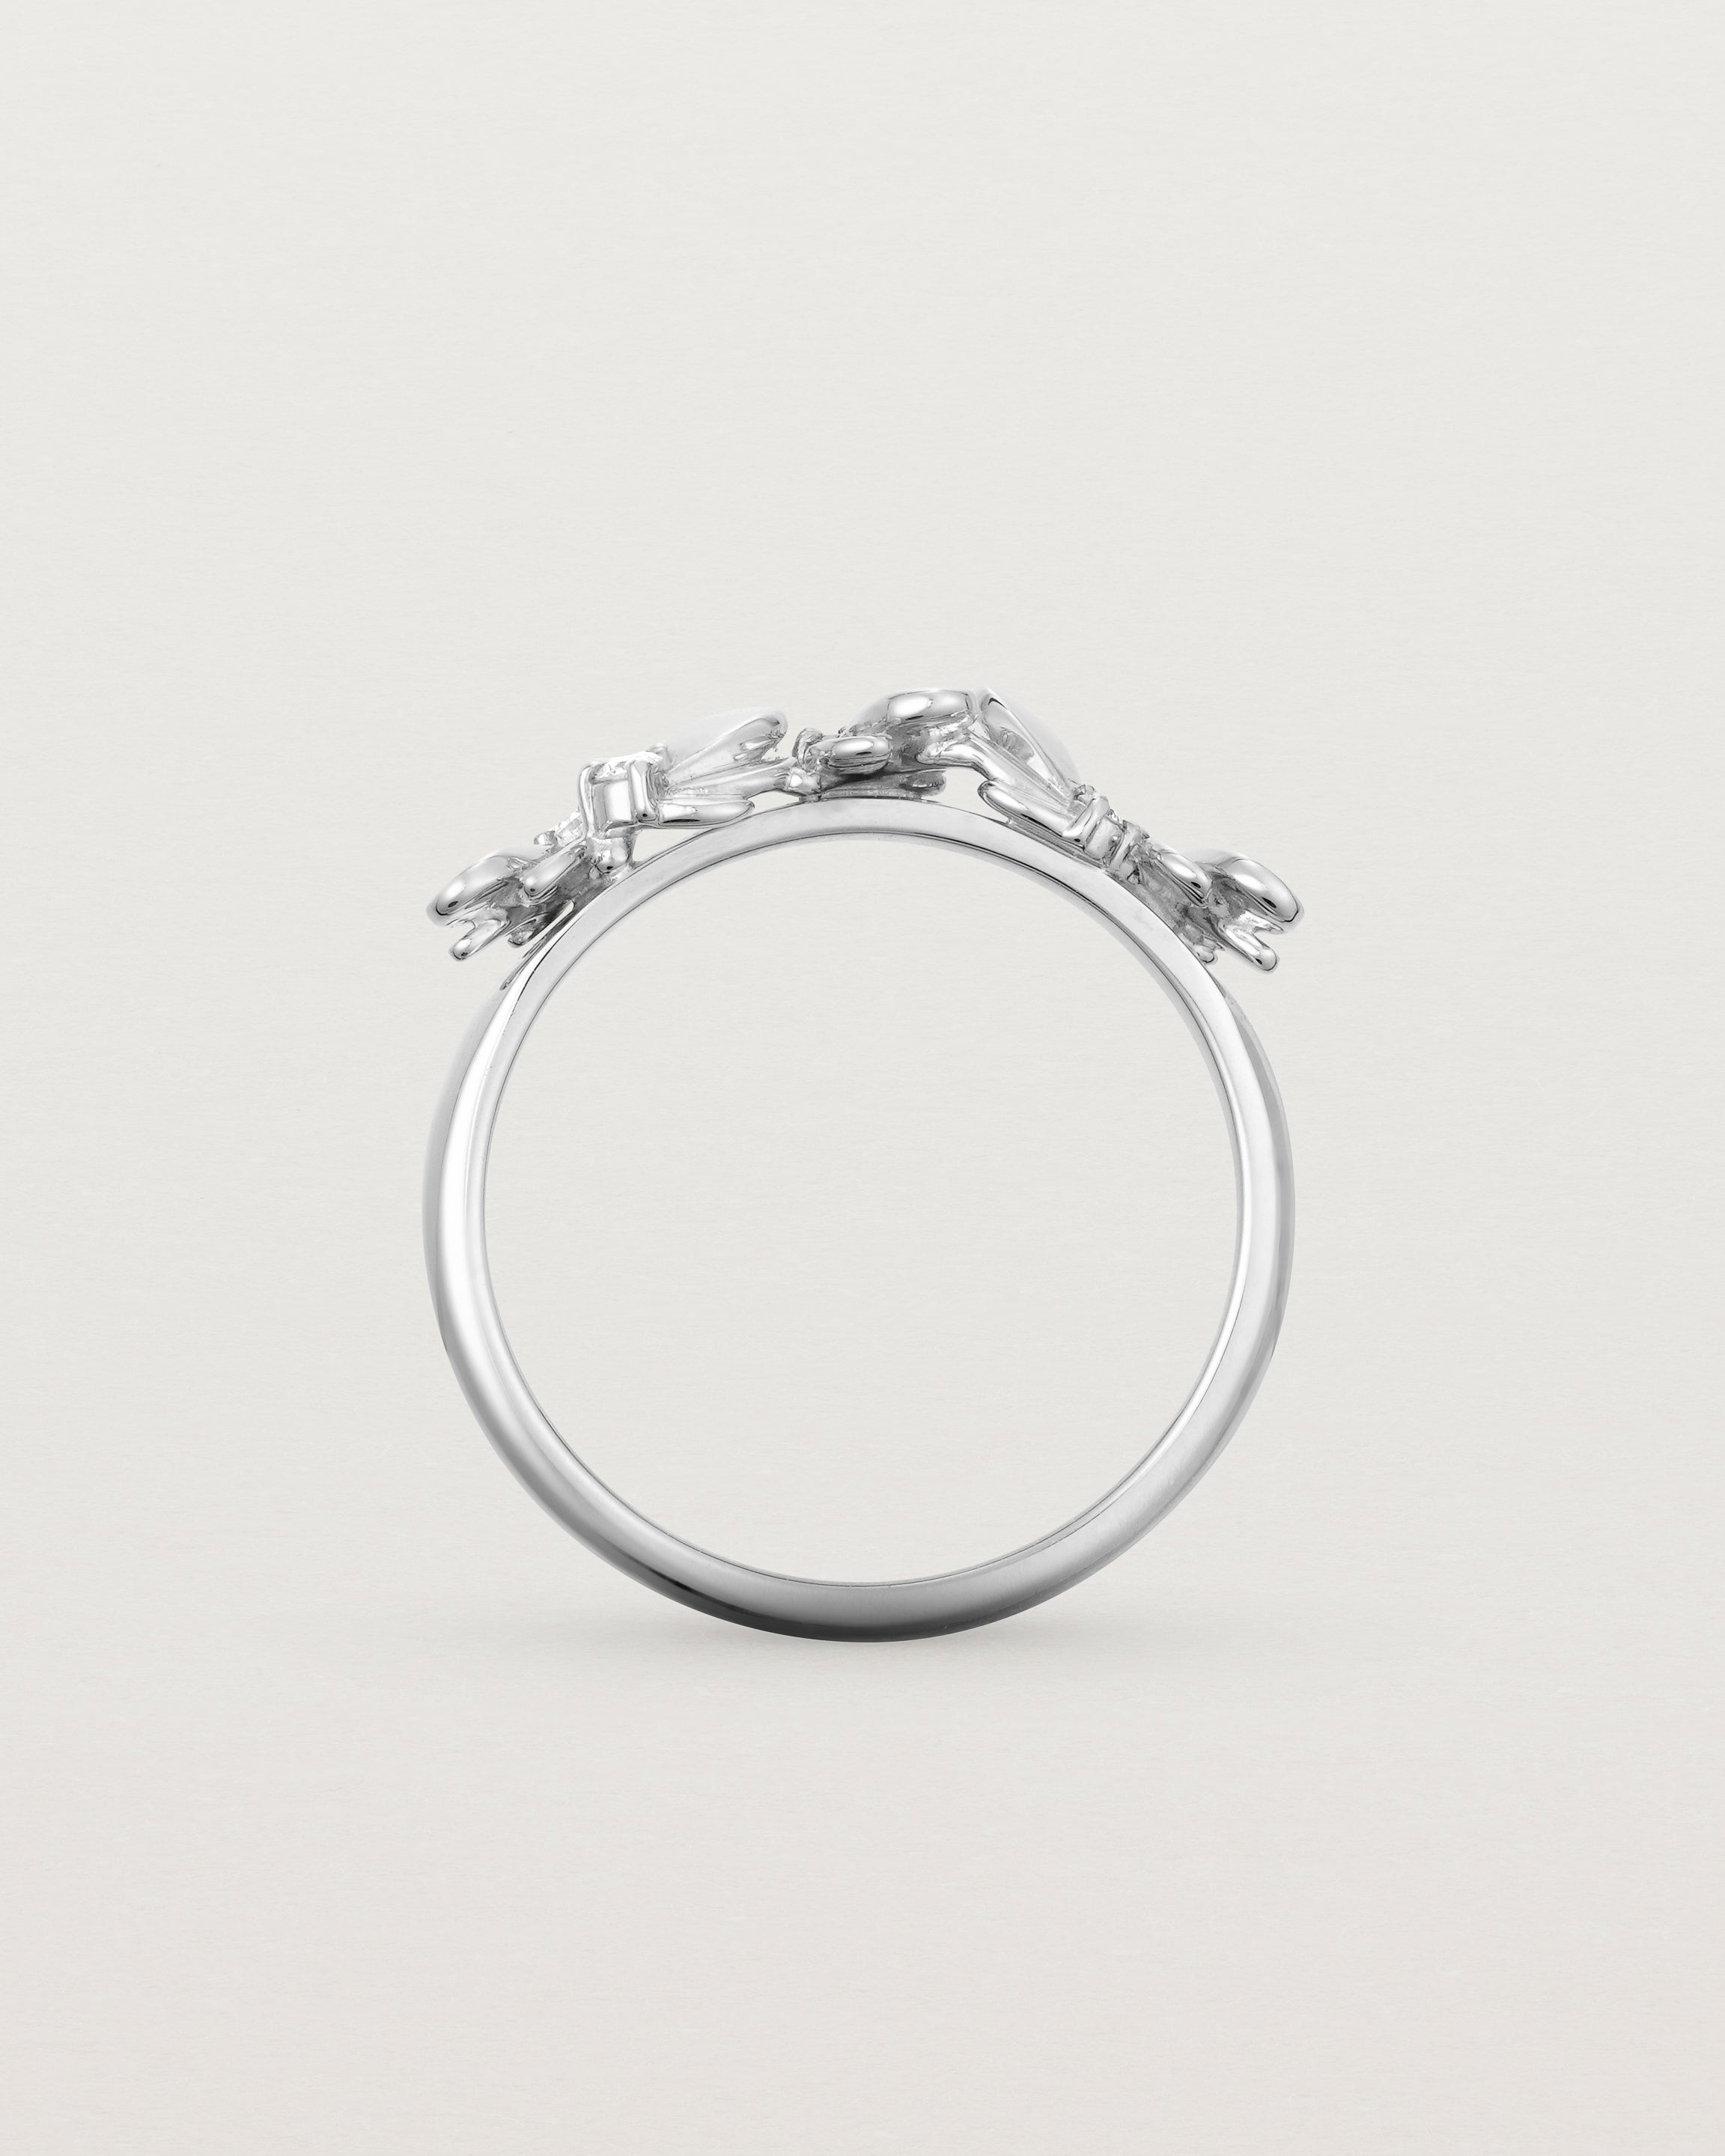 Standing view of the Aeris Wrap Ring | Diamonds in White Gold.